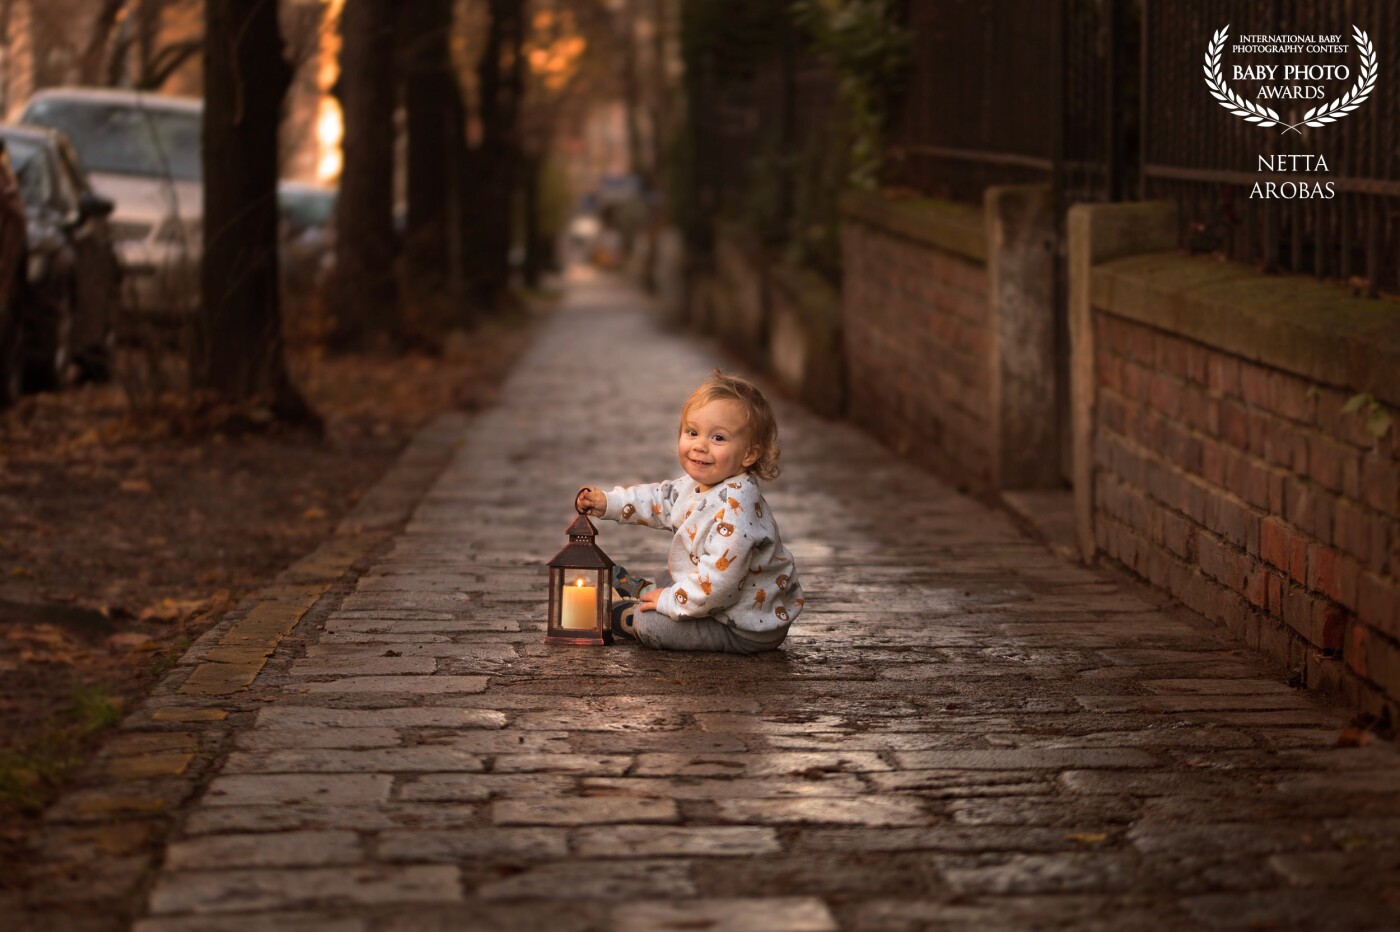 Autumn is lantern time! When the day looks dark, a small light goes a long way.<br />
Who shines brighter- the candle light or this sweet little boy?